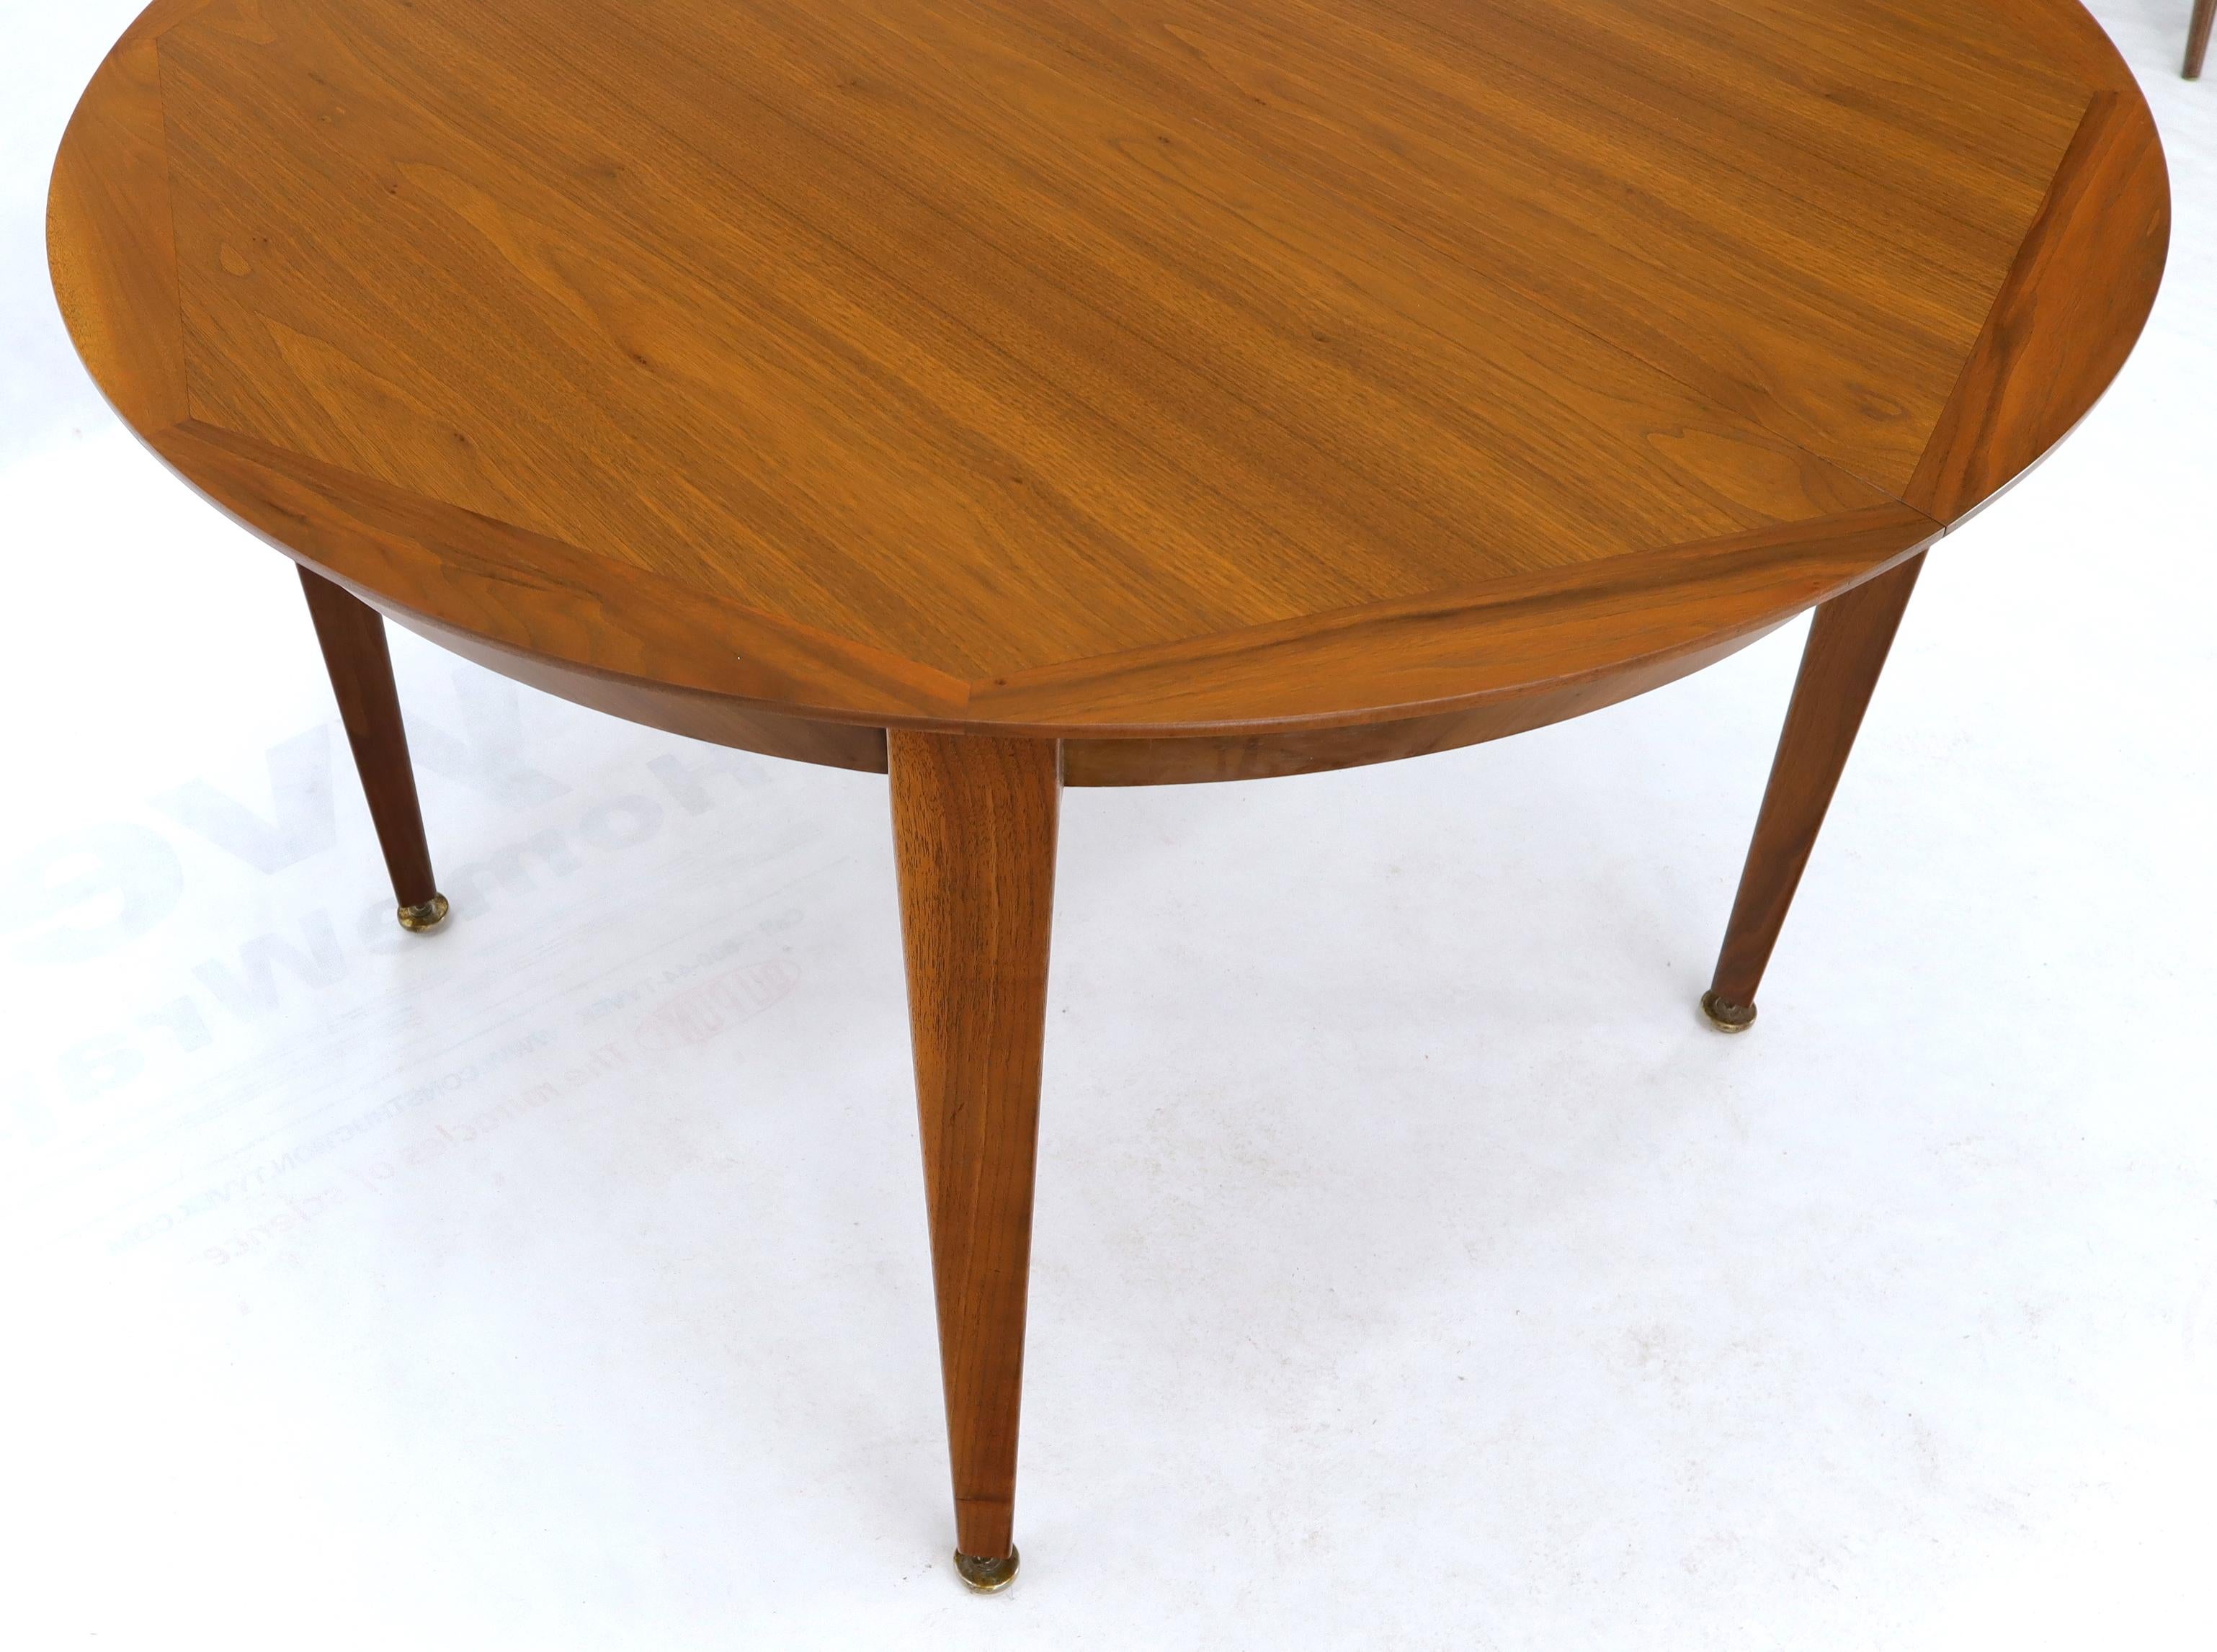 Lacquered Round Walnut Tapered Legs Dining Room Table with Two Extensions Boards For Sale